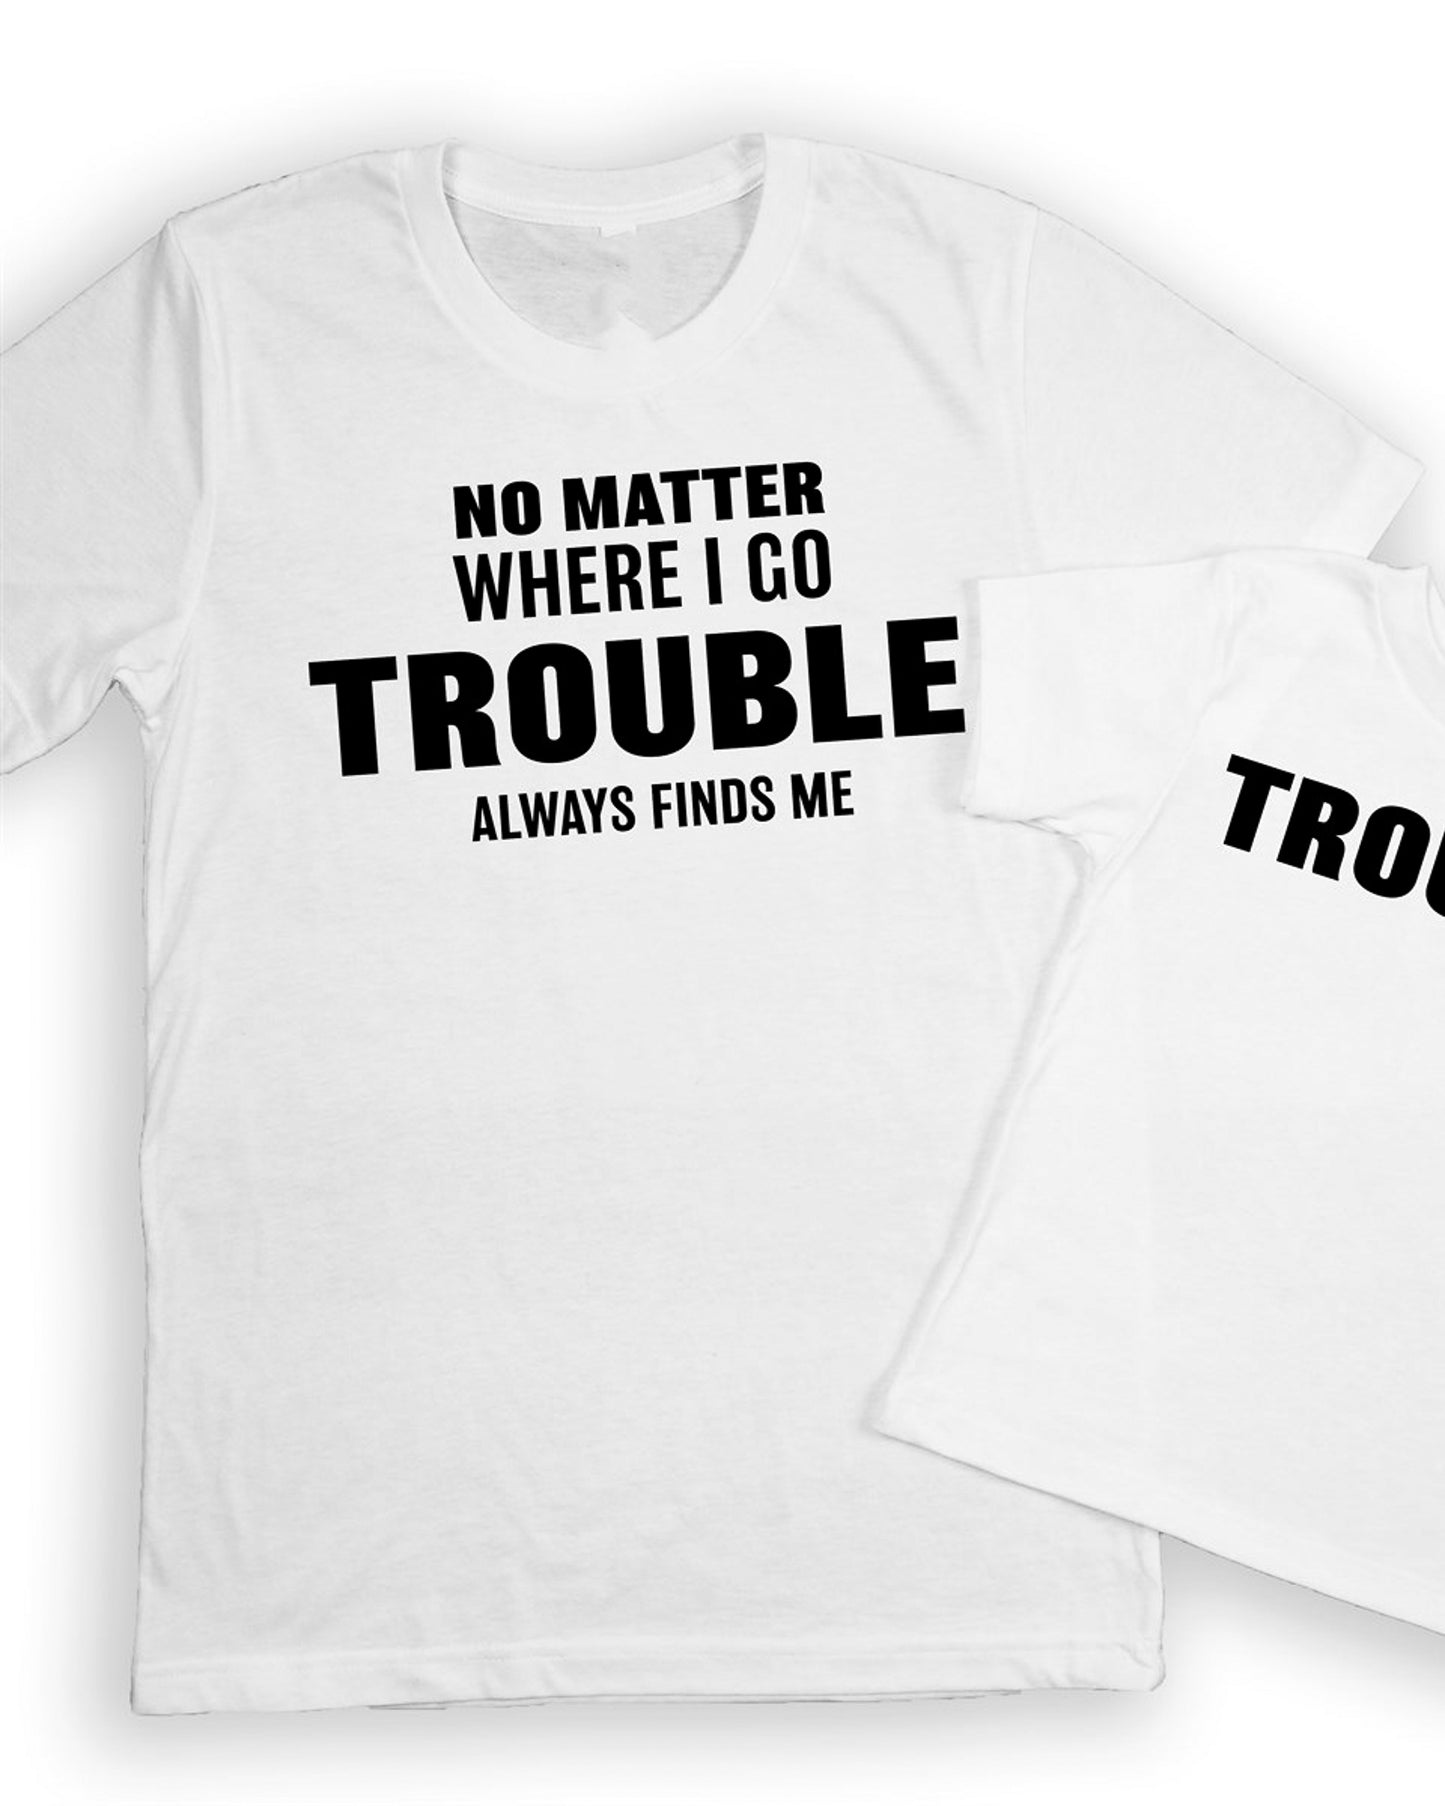 No Matter Where I Go Trouble Always Finds Me T-Shirt or Crew Sweatshirt